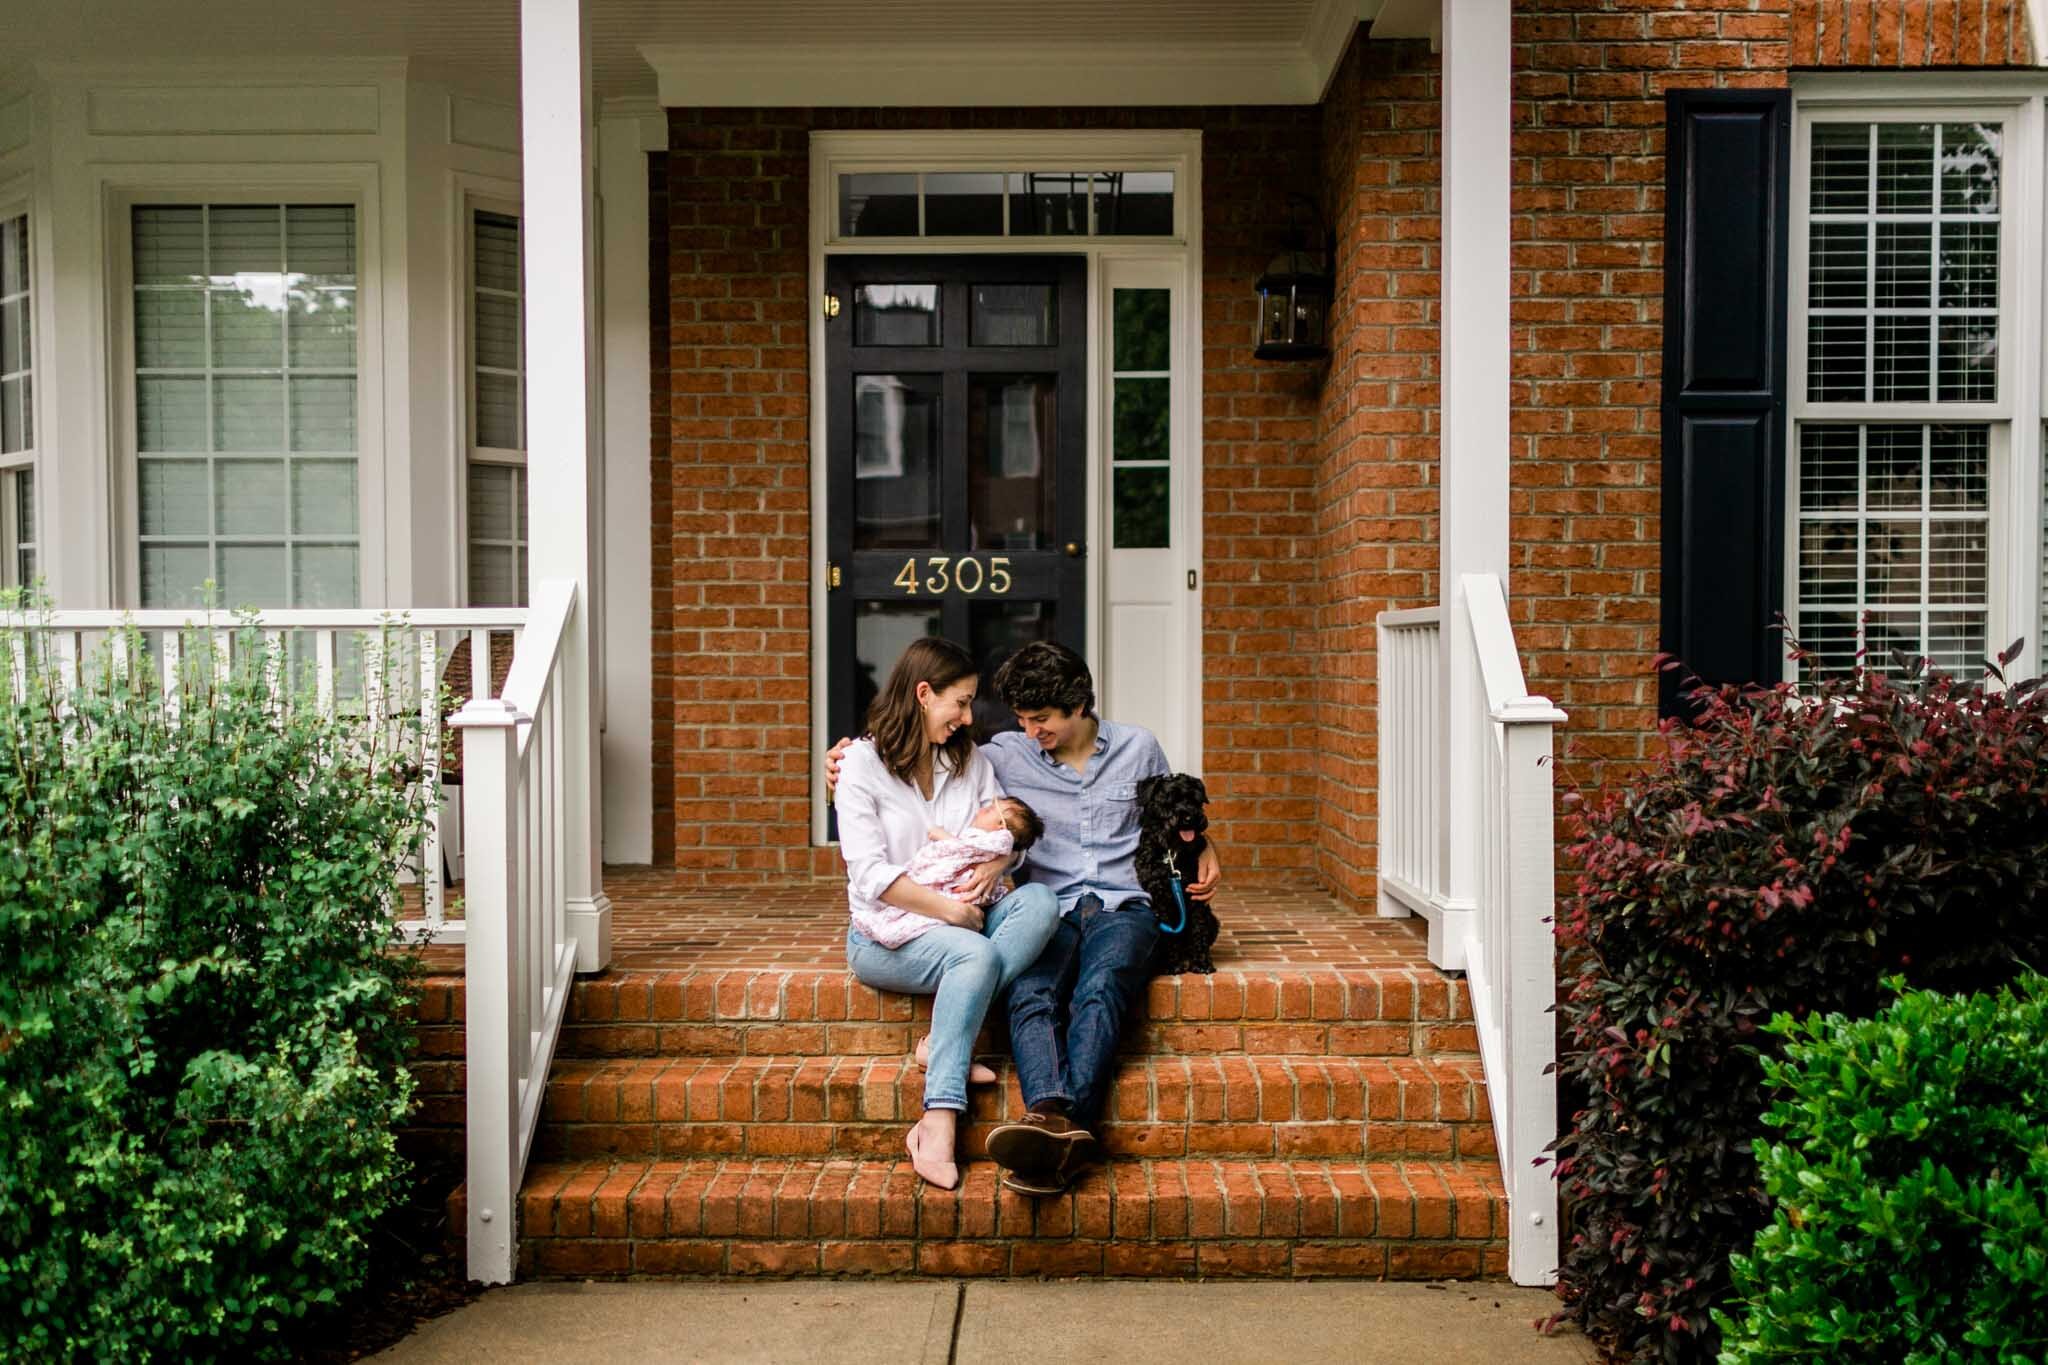 Durham Newborn Photographer | By G. Lin Photography | Porch portrait of new parents sitting in front of house steps